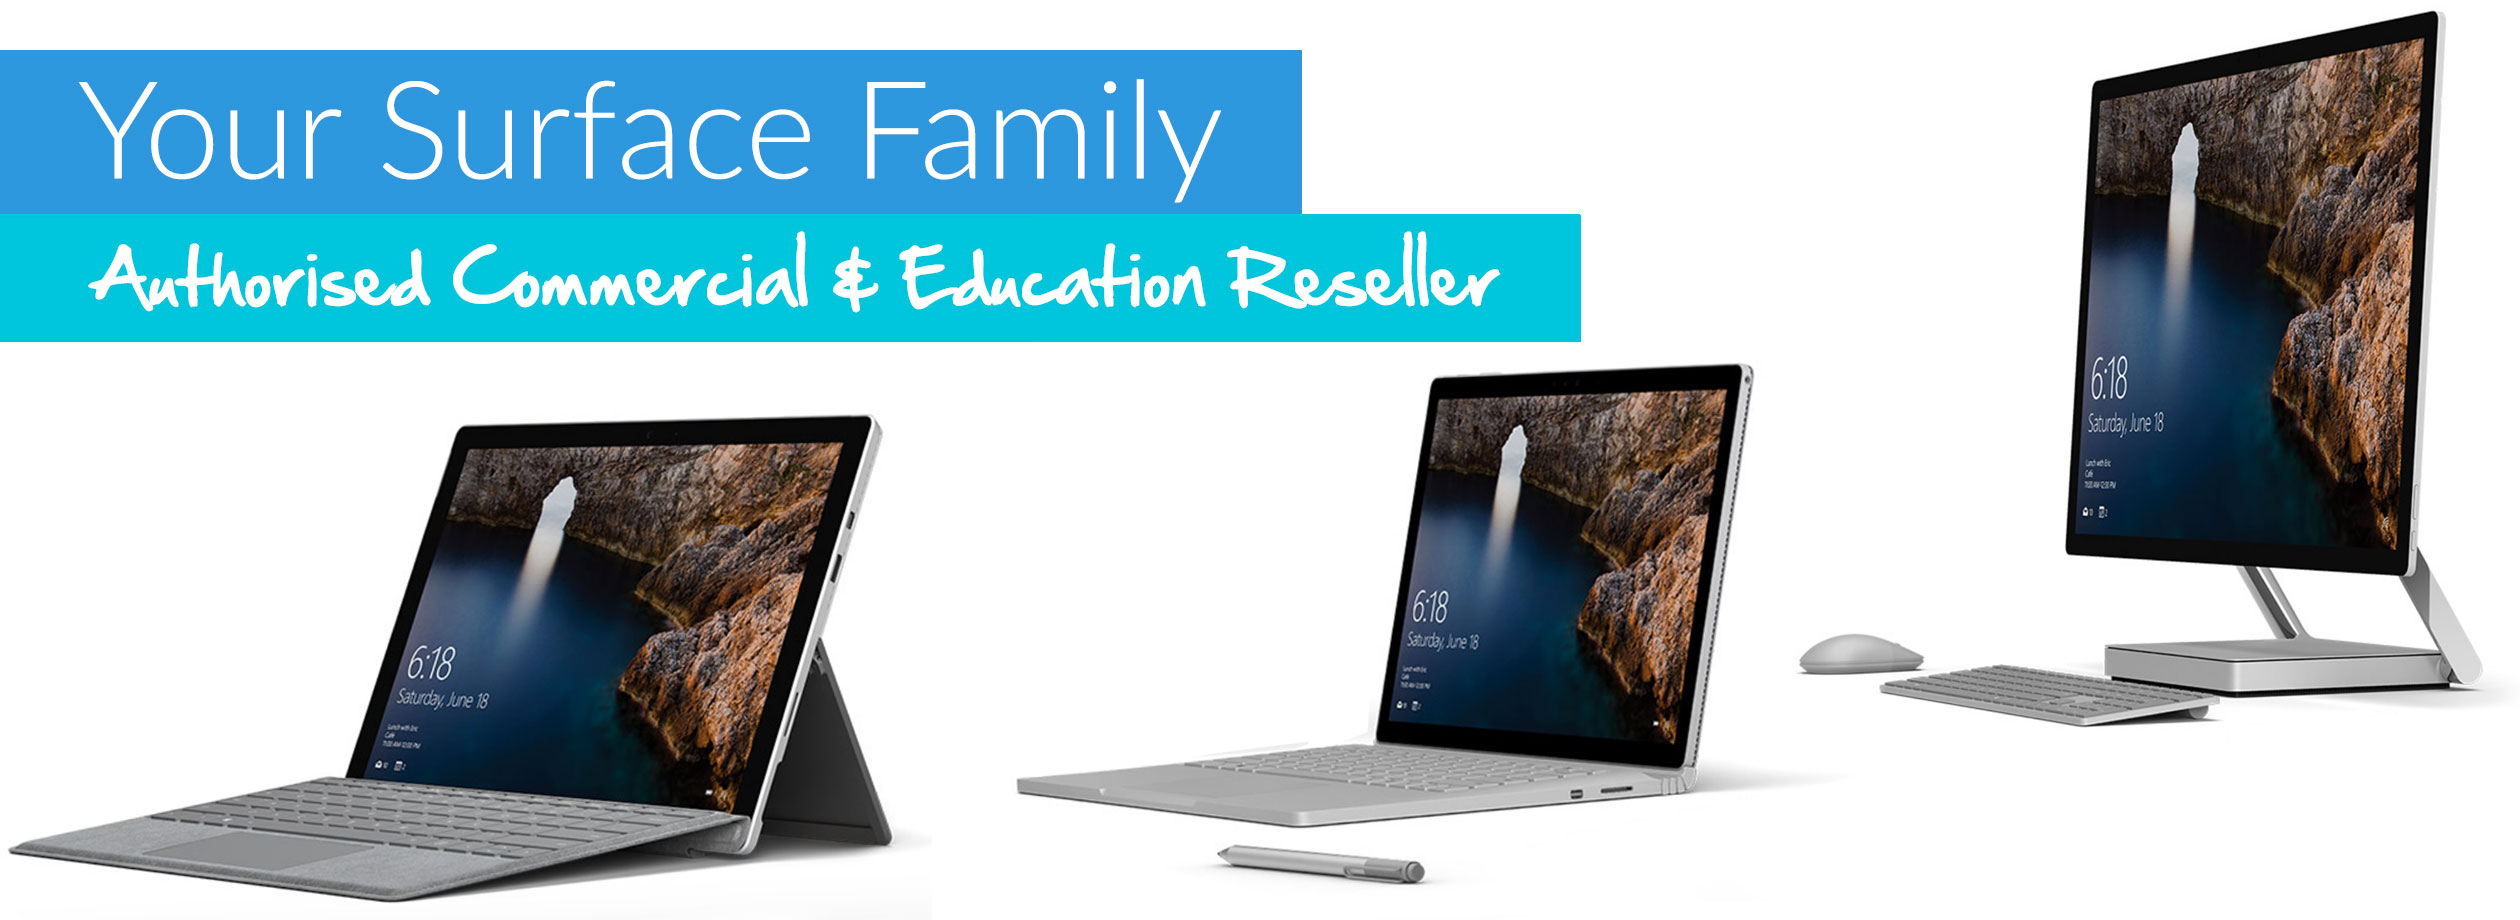 Your Surface Family!